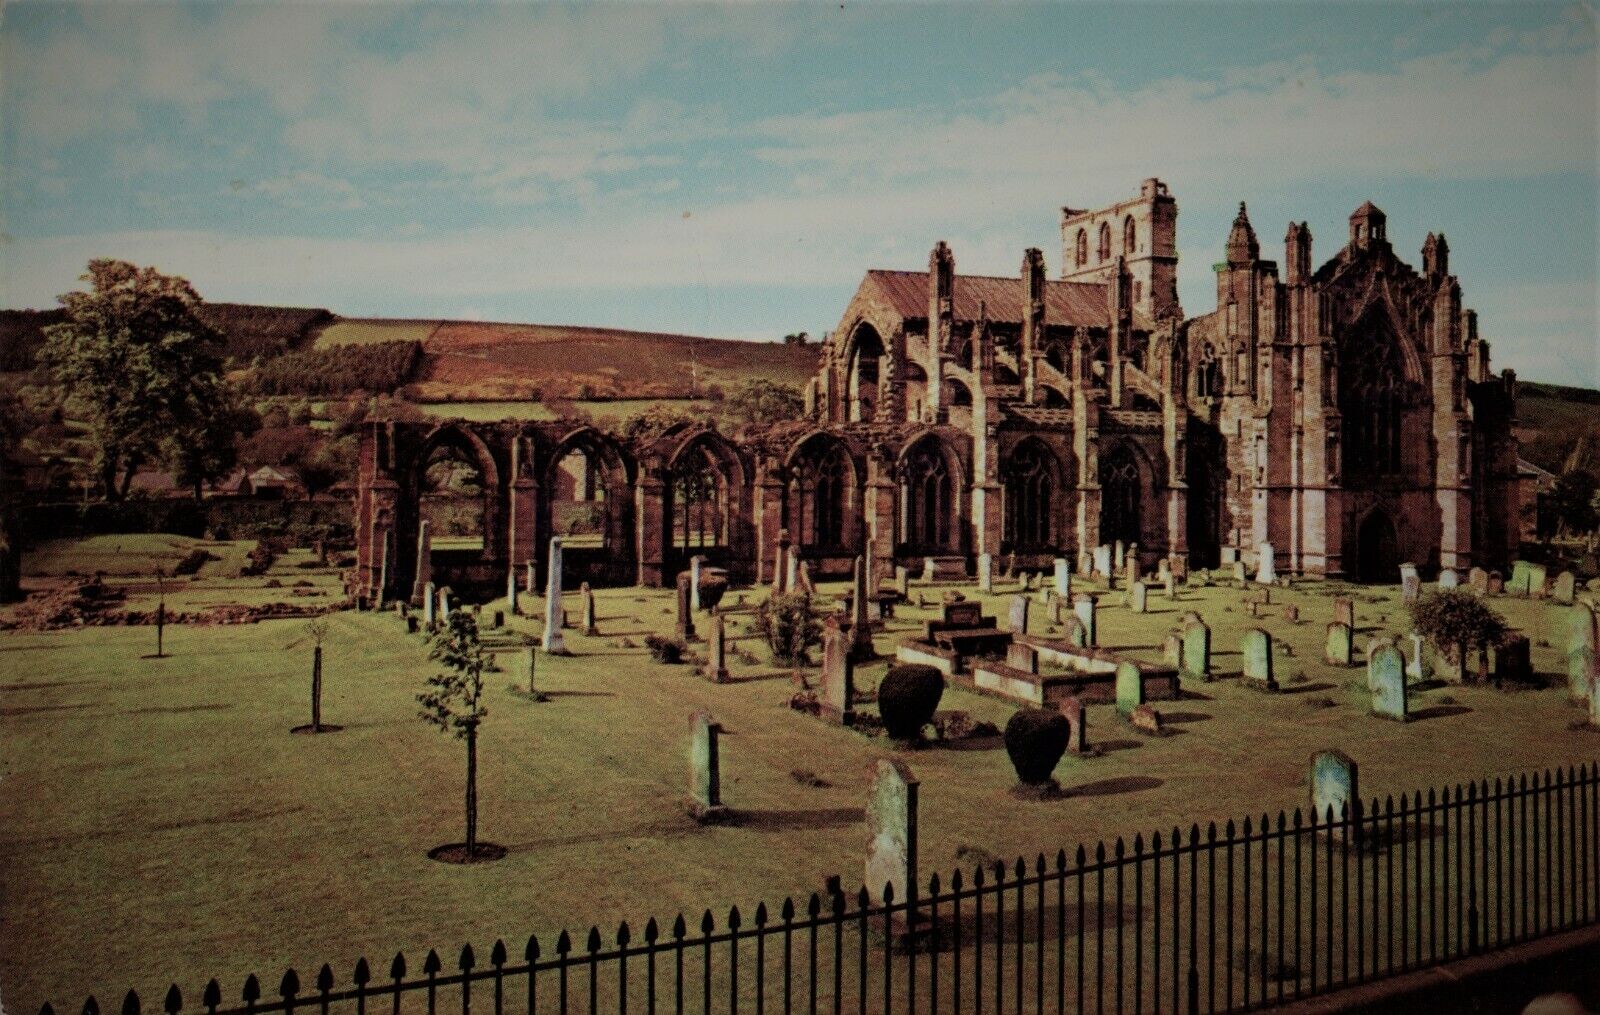 House Clearance - Collectable service - Melrose Abbey,  - posted 1973